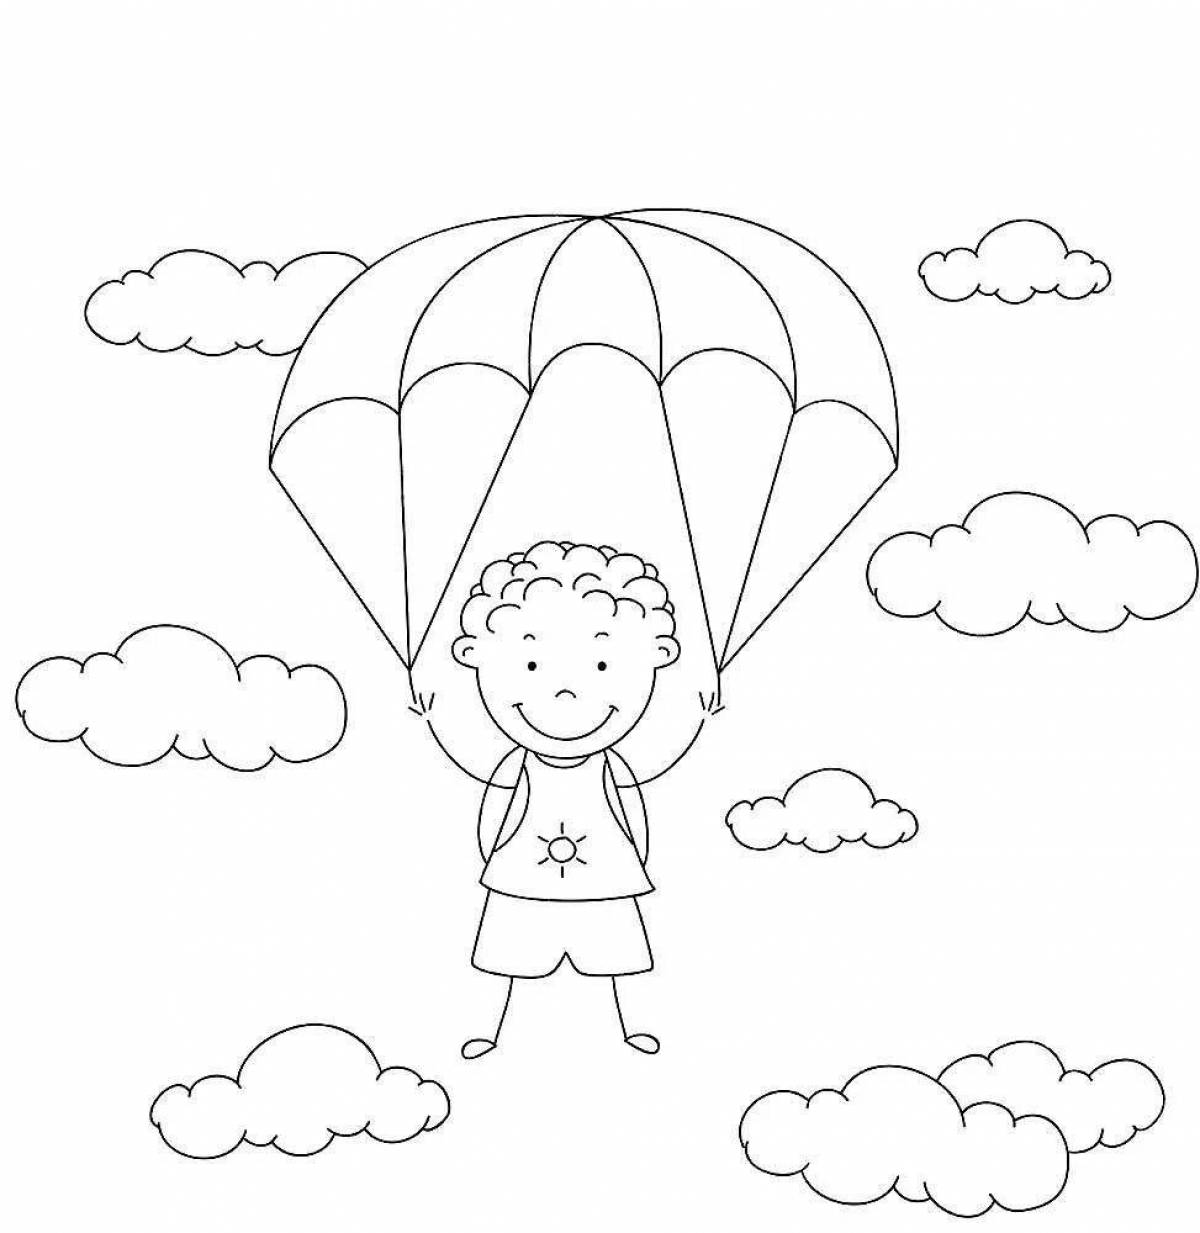 Animated skydiver coloring page for kids